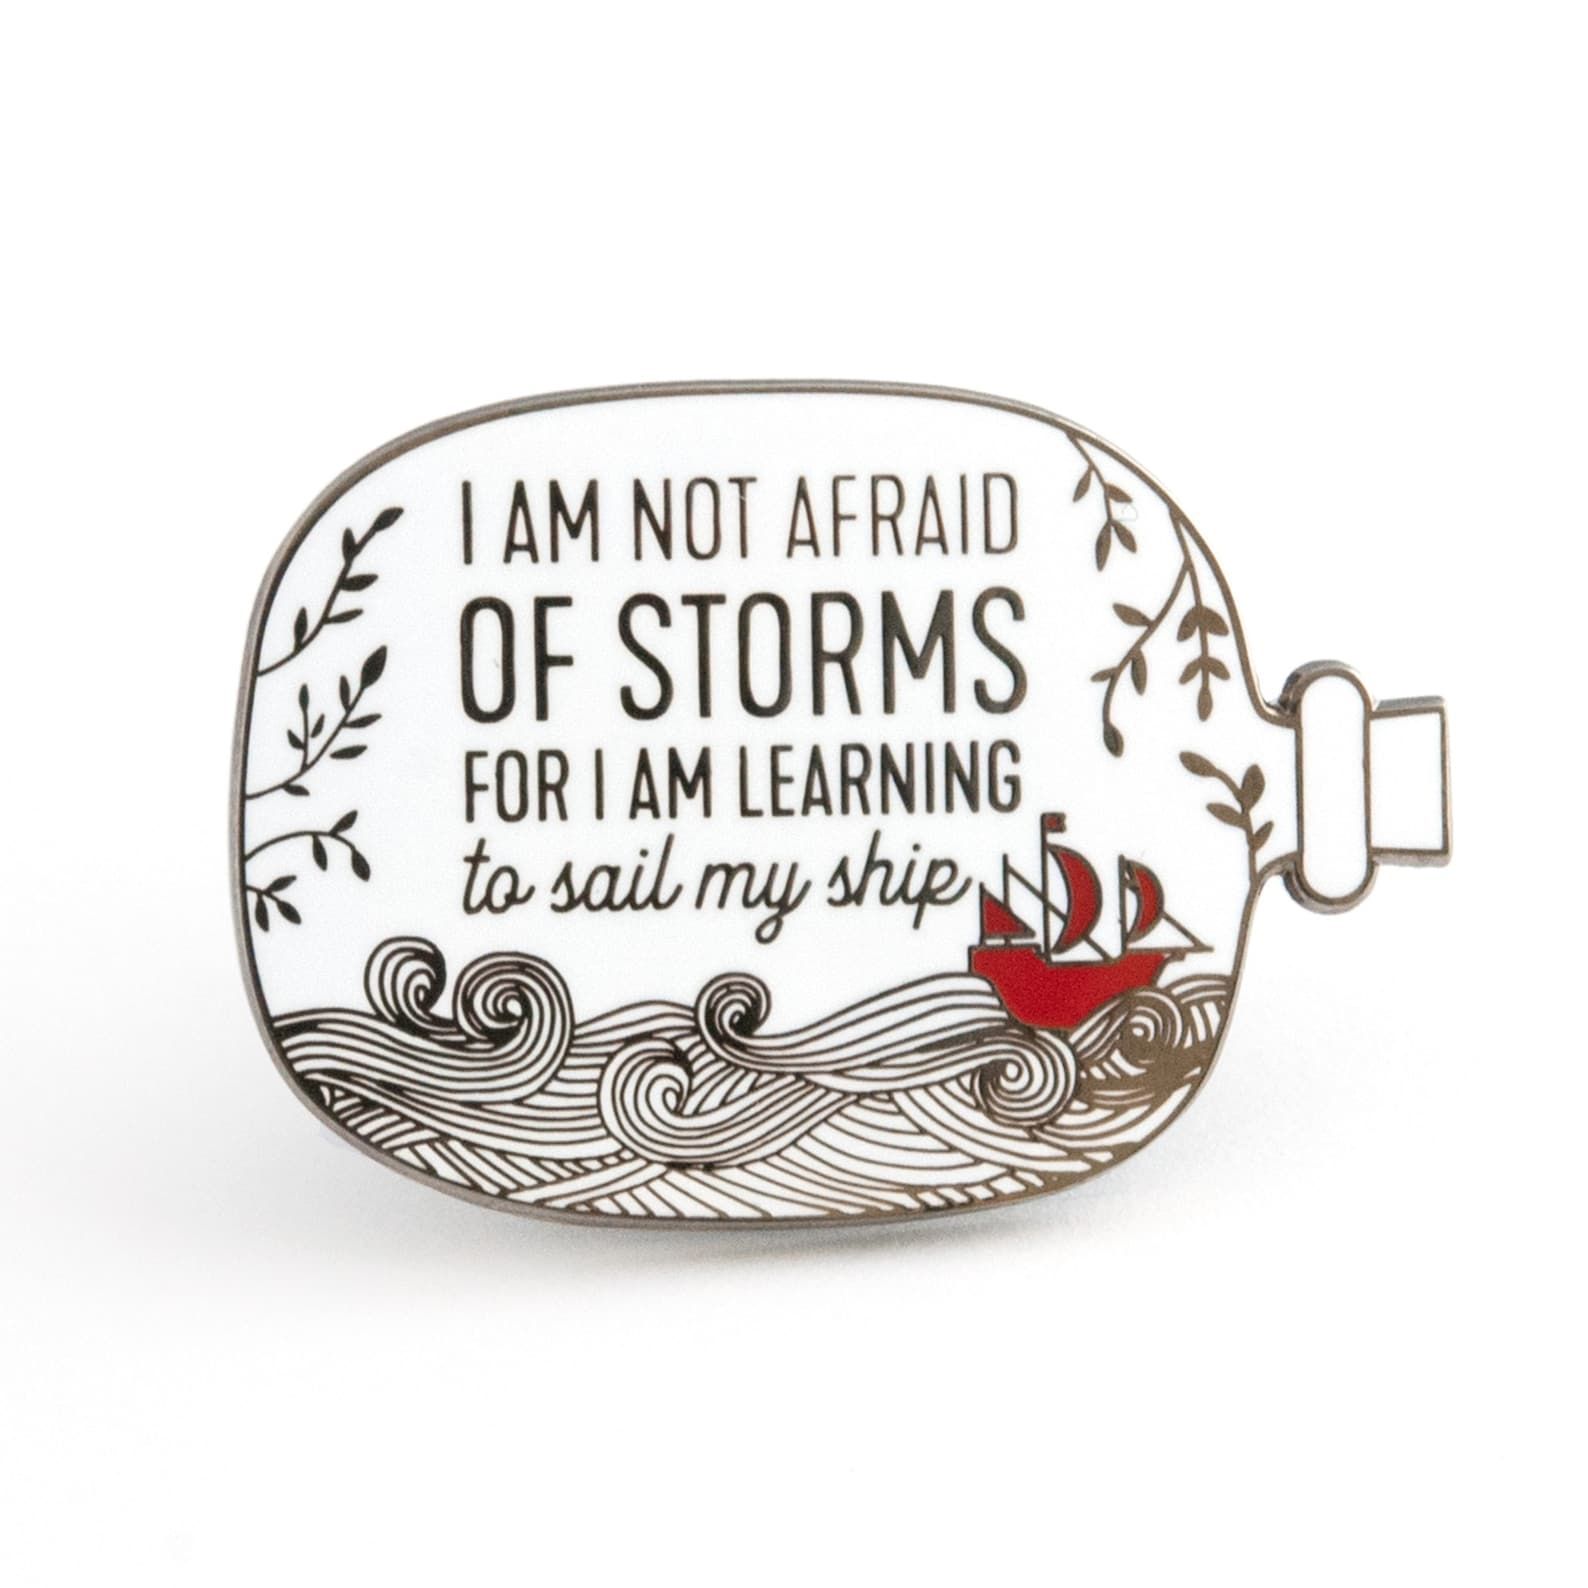 An email pin shaped like a ship in a bottle that reads "I am not afraid of storms for I am learning to sail my ship."